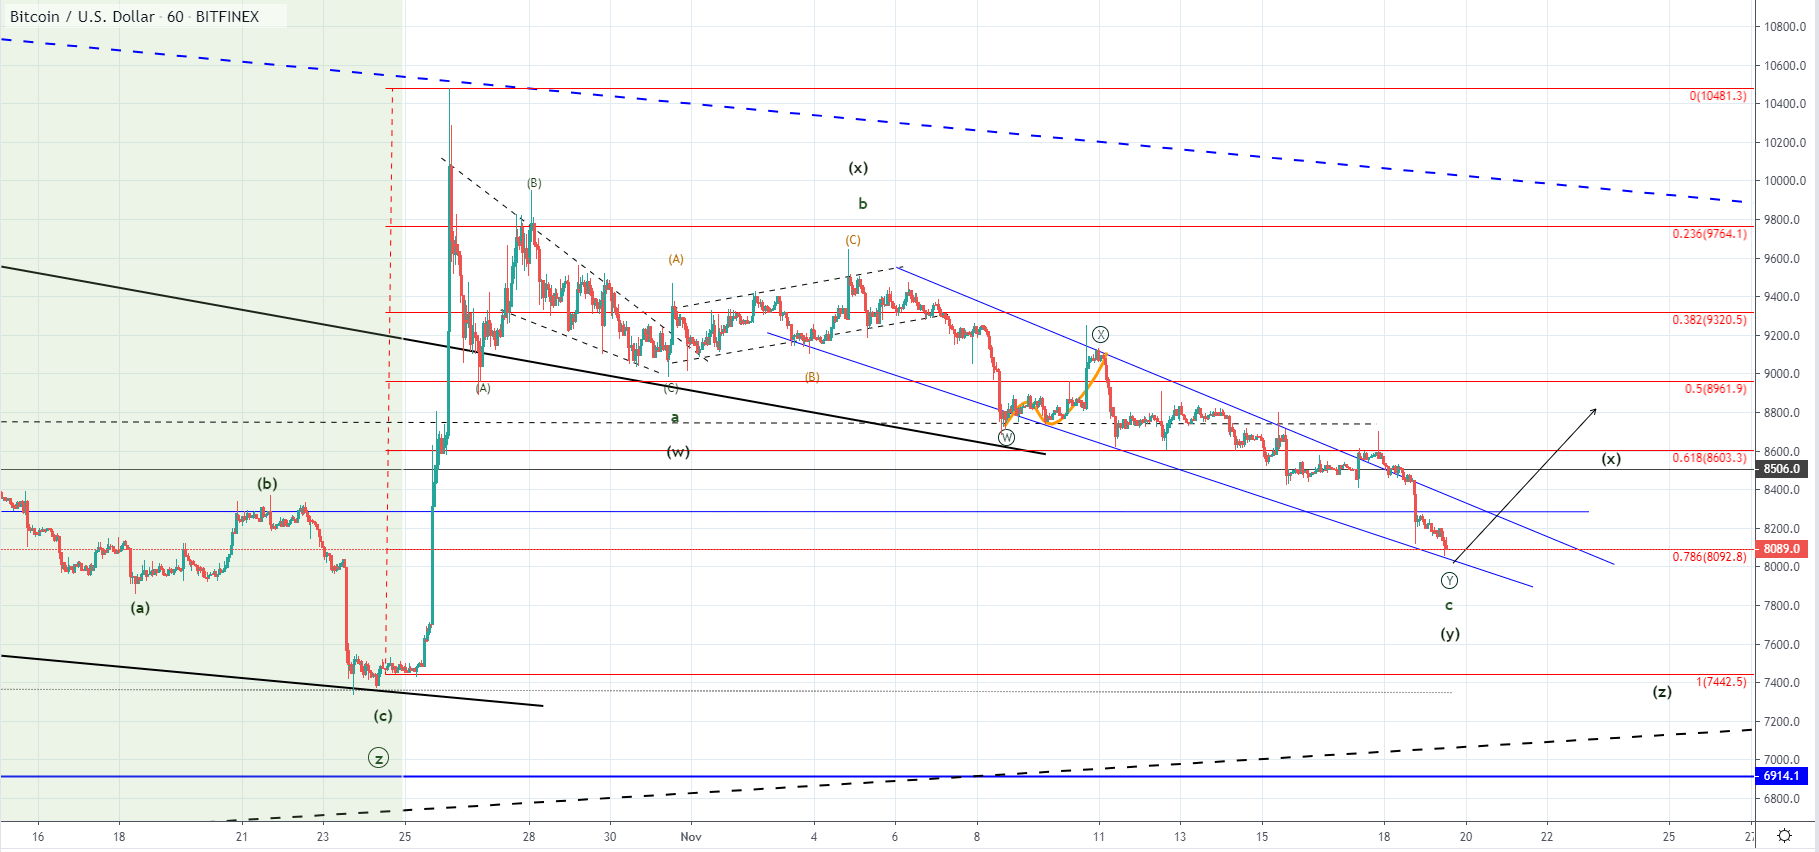 BTC and XRP - Has the correction ended?